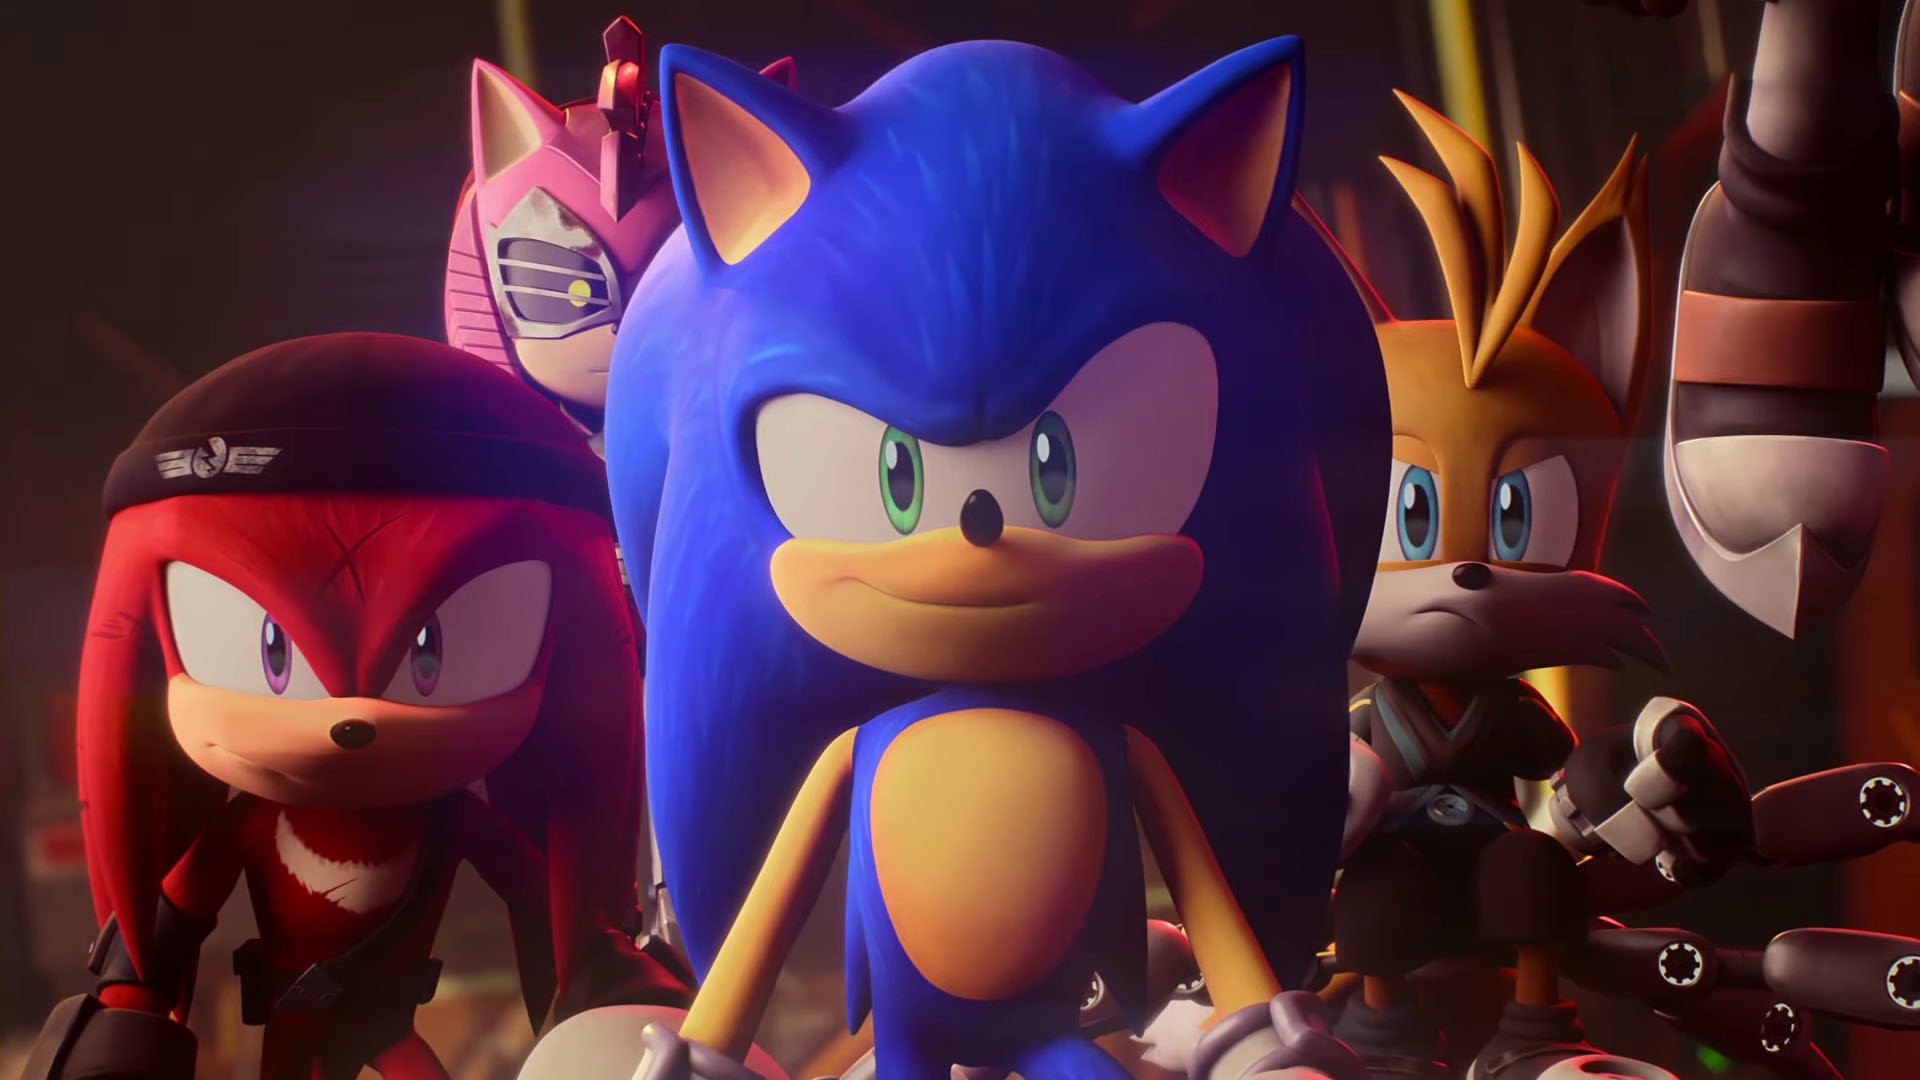 New Episodes of Sonic Prime will be debuting on Netflix in July — Games  Enquirer